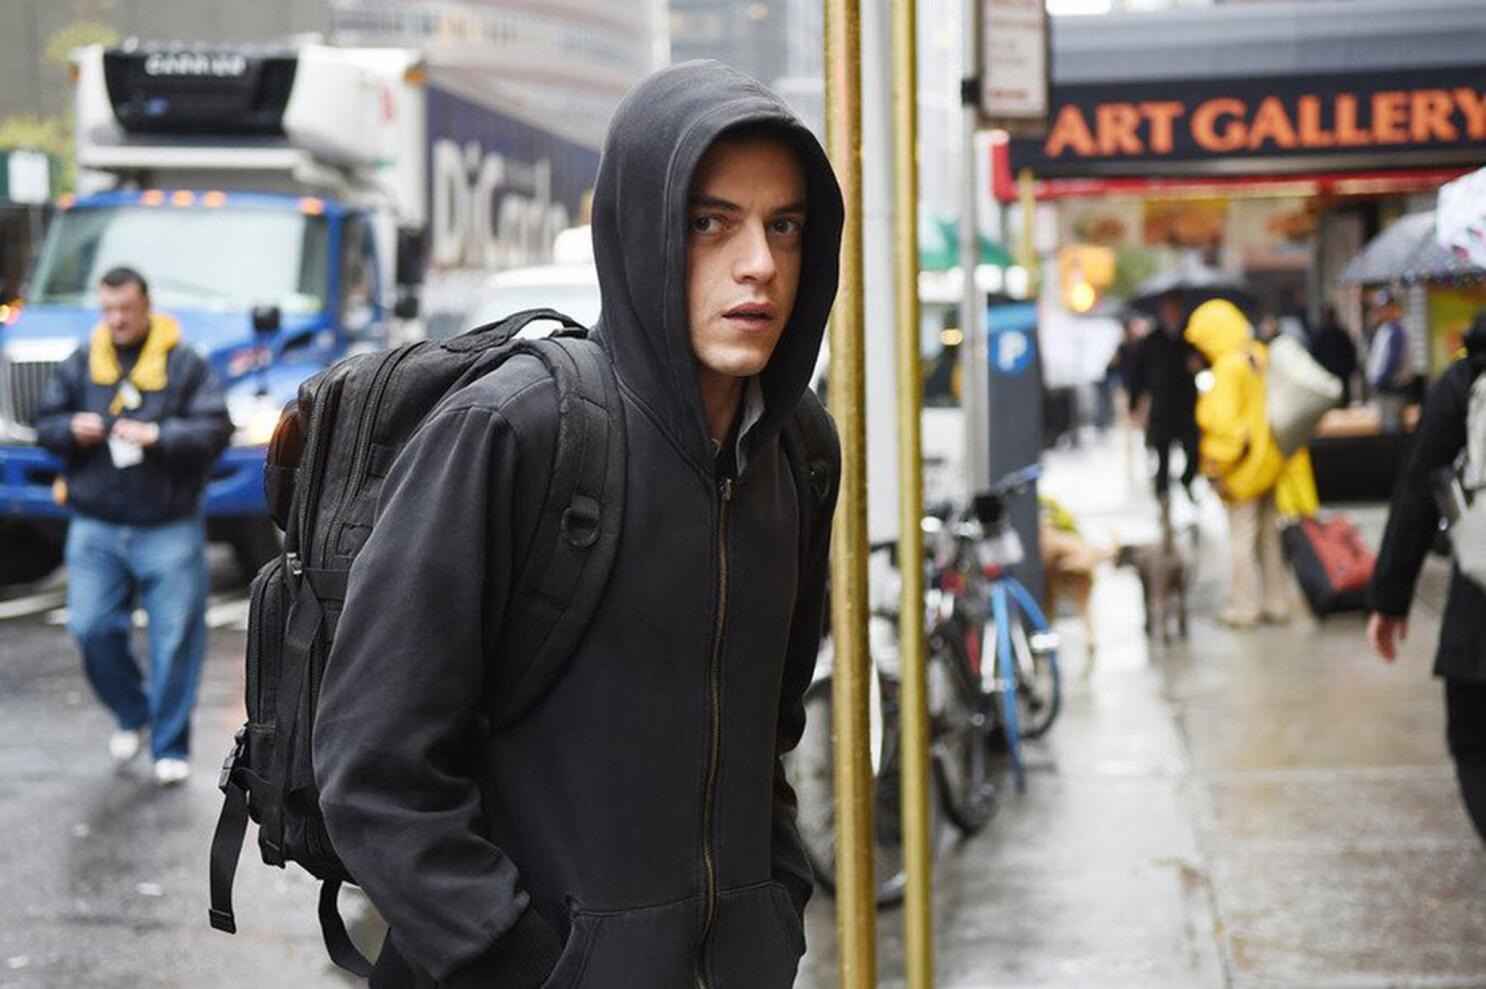 Mr. Robot' Knew in 2016 What America Would Be Like in 2017